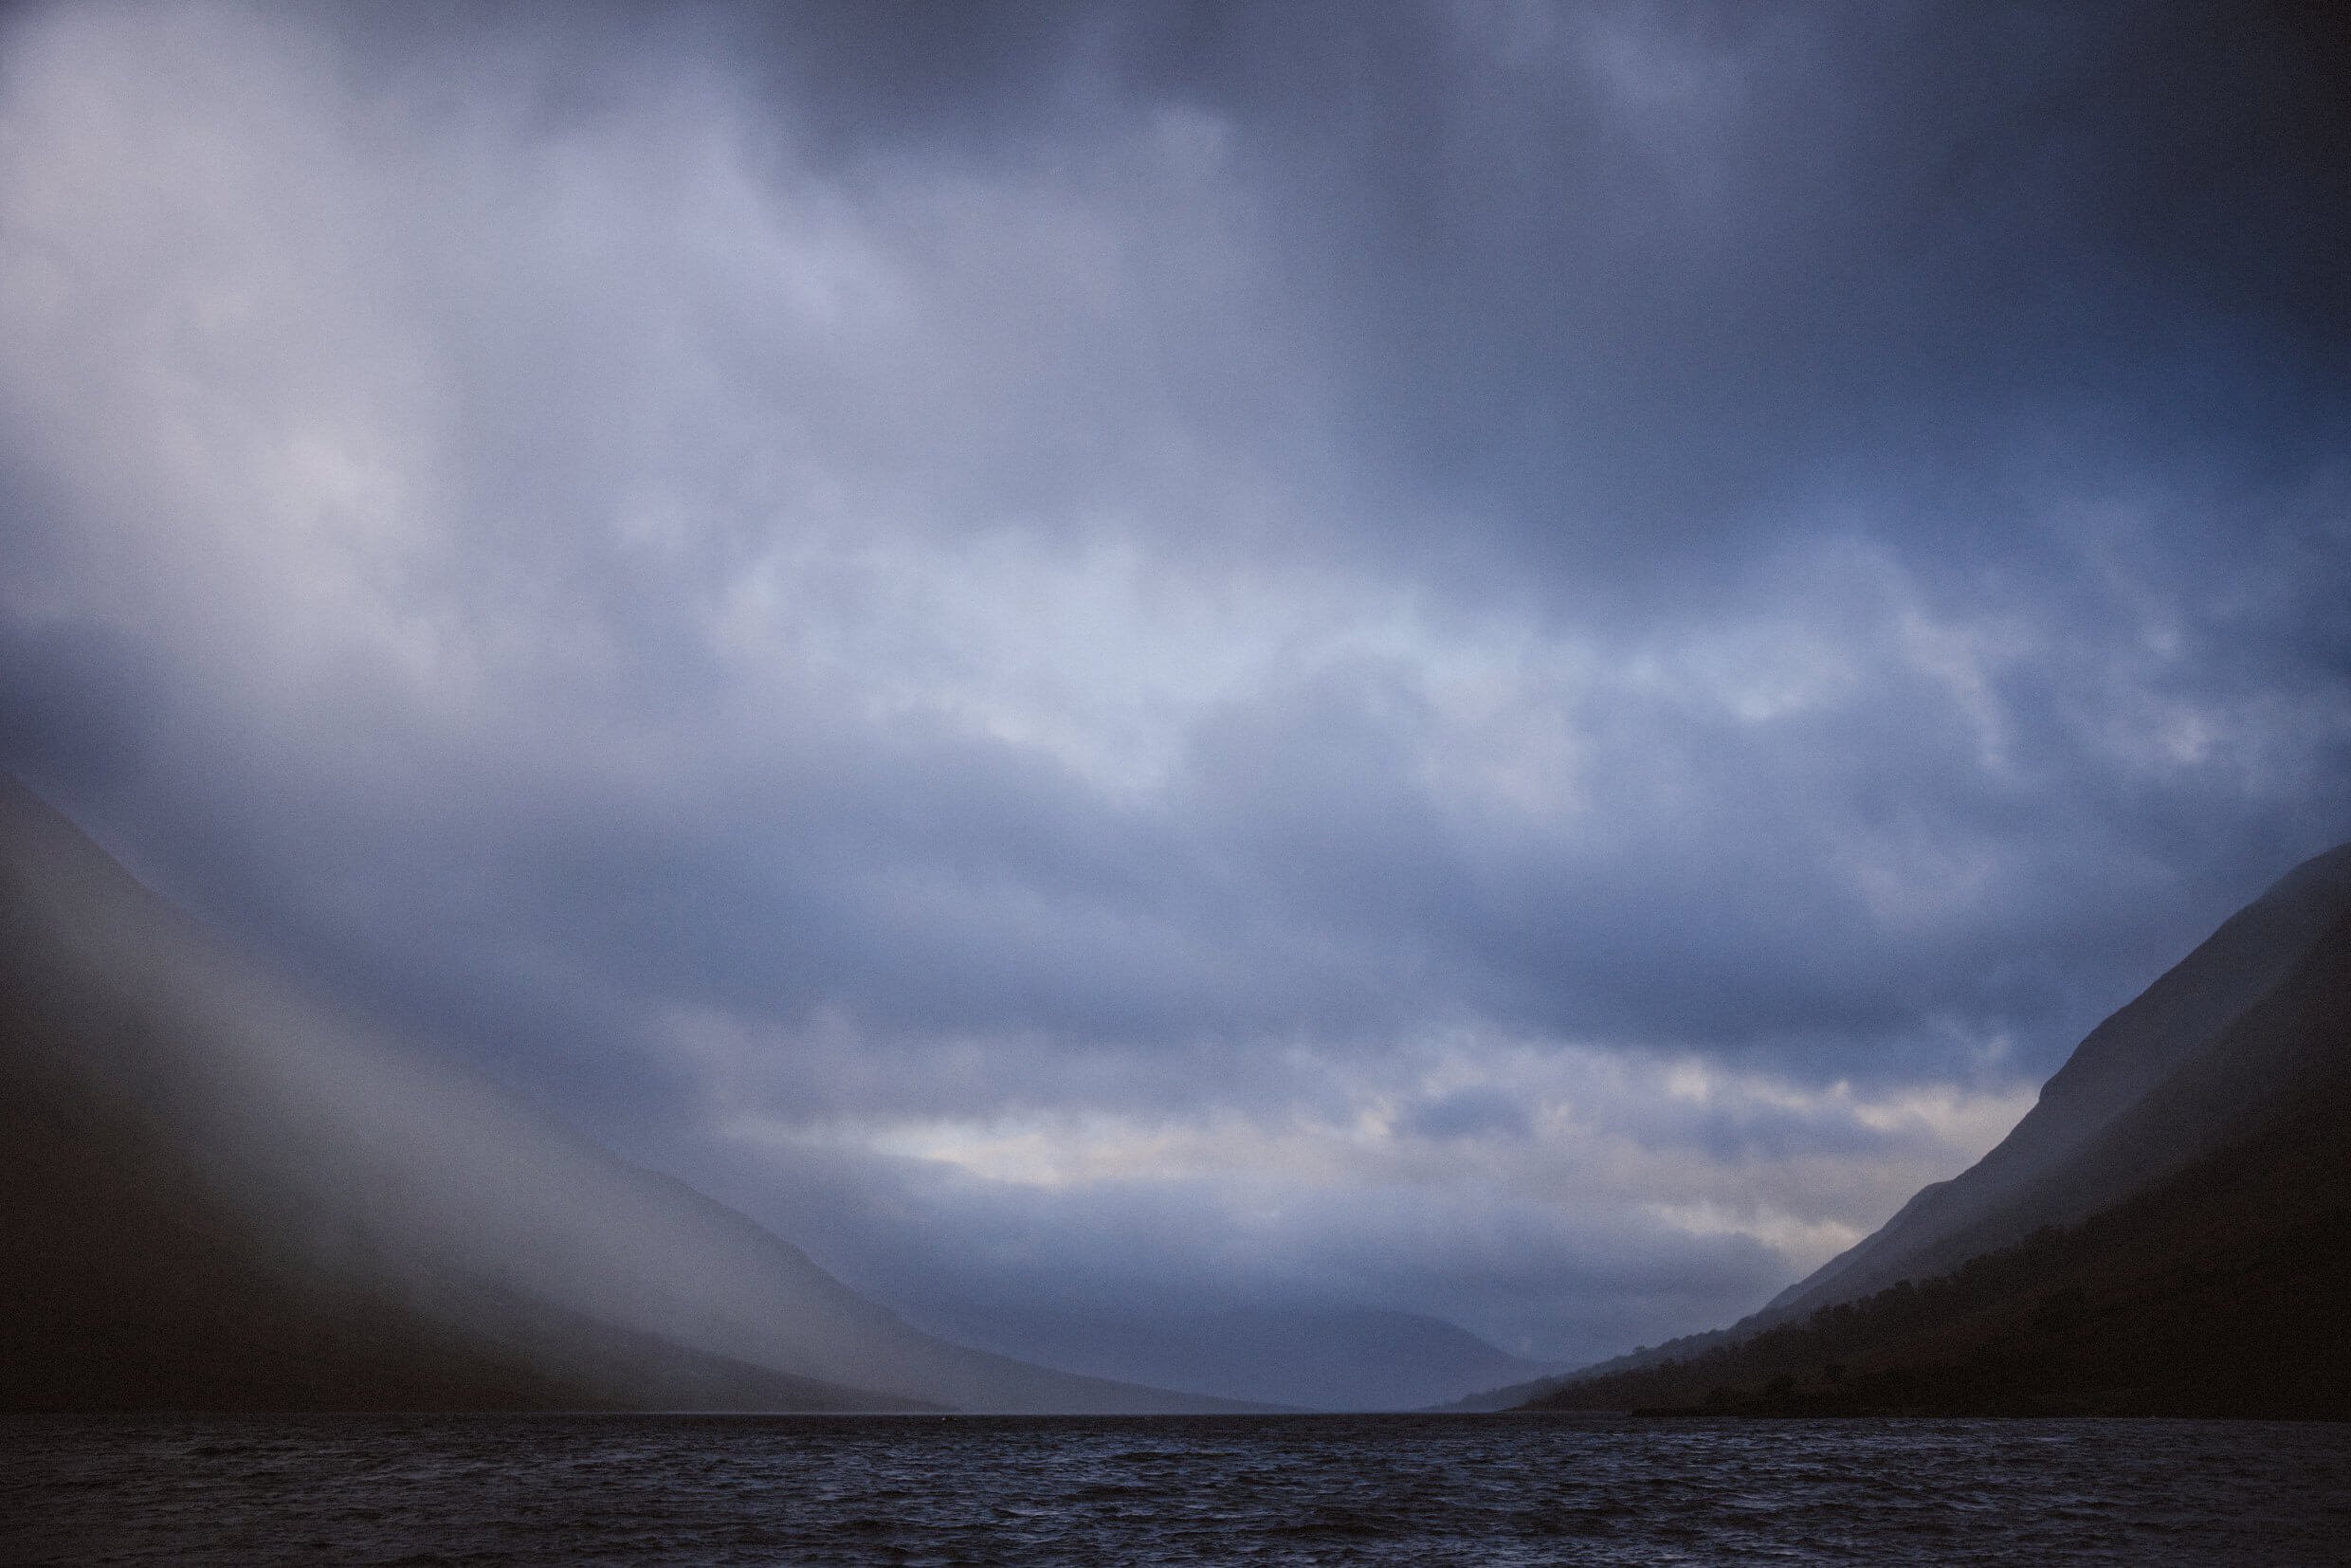 loch etive with a dramatic stormy sky and rain blowing in